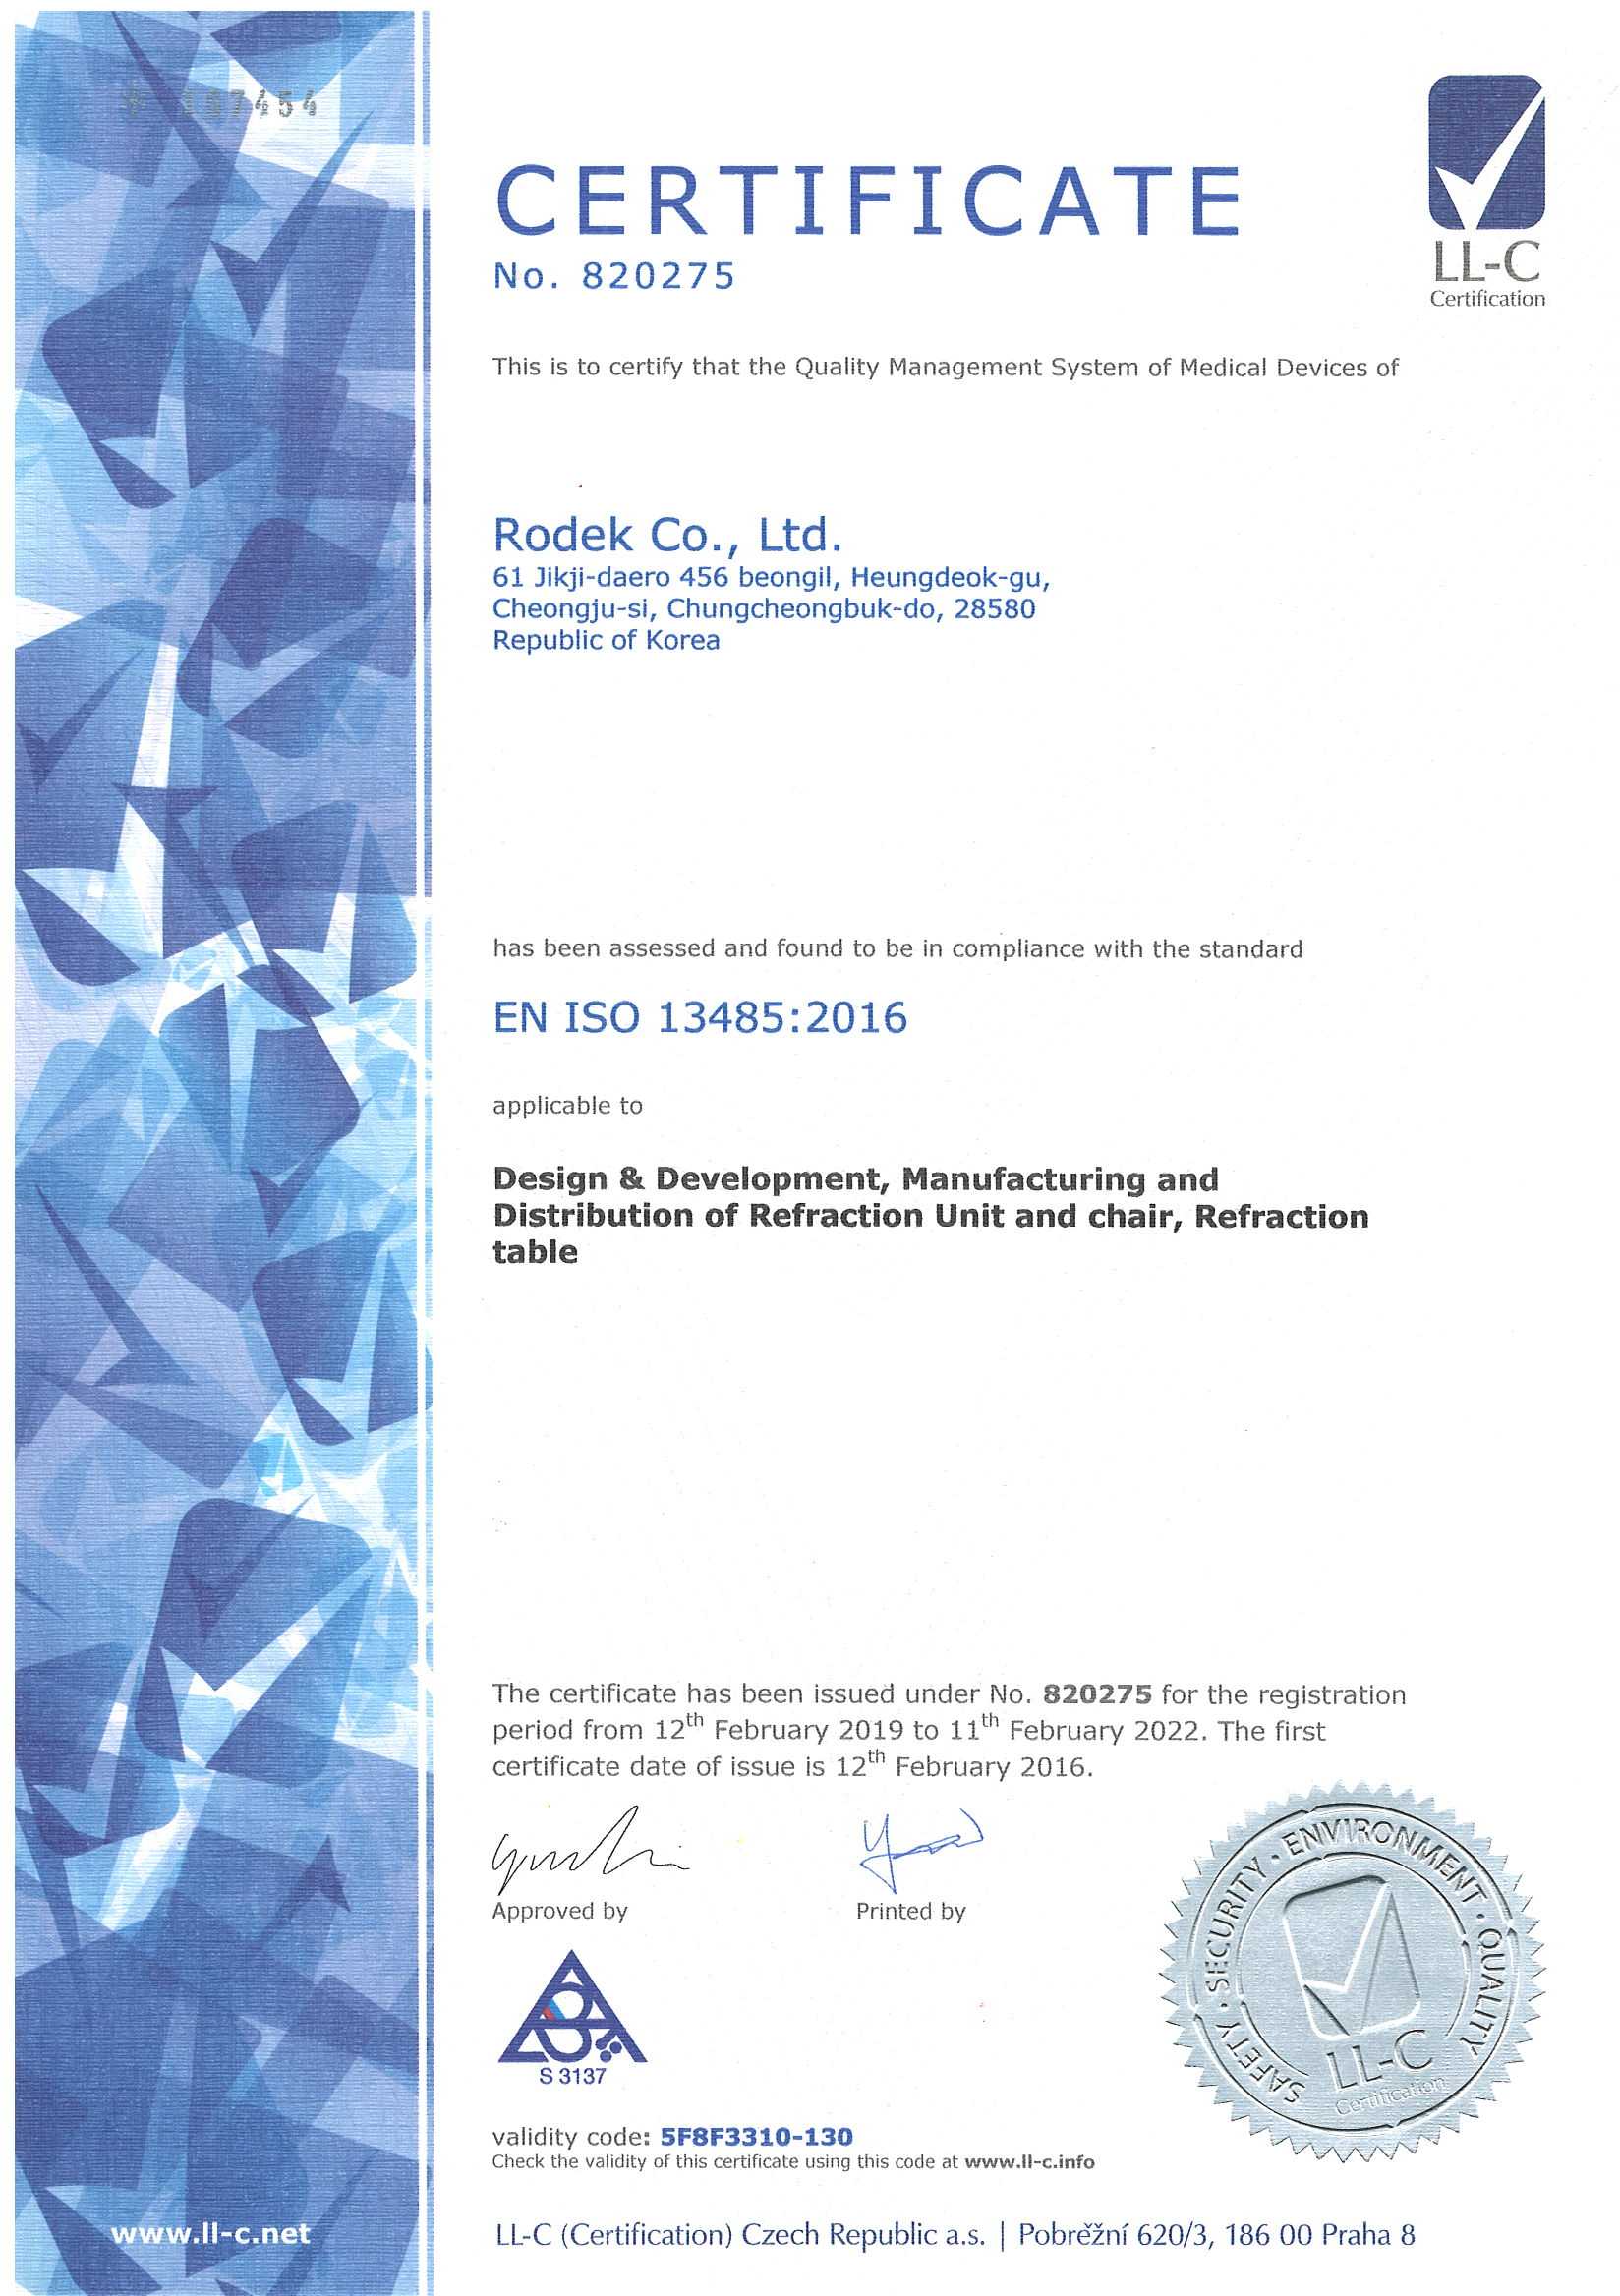 ISO 13485:2016 Certification